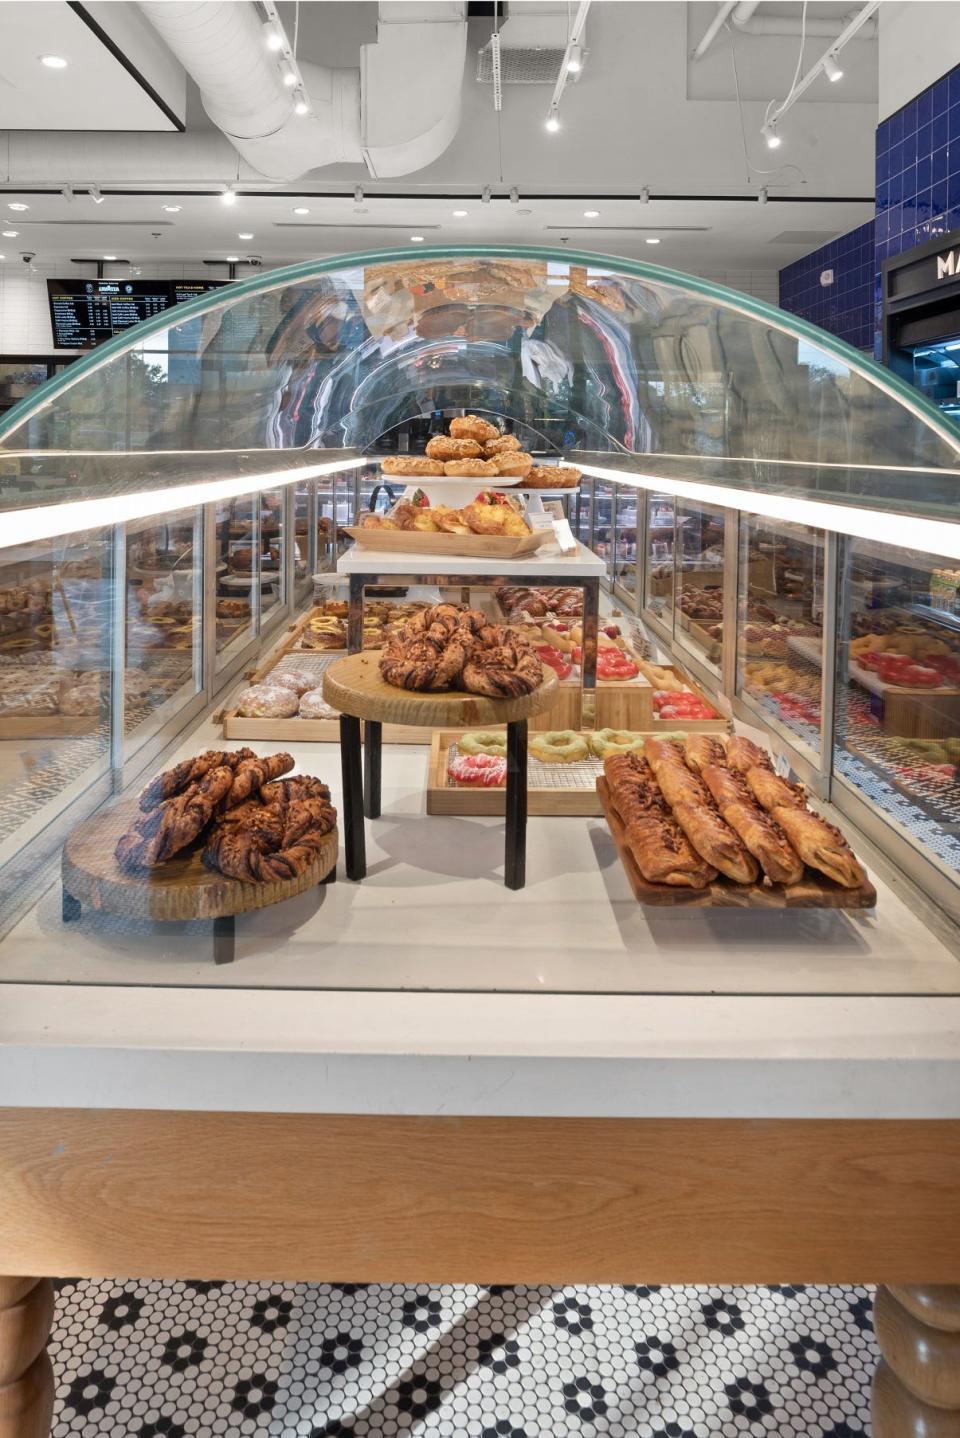 Bakery franchise Paris Baguette is set to open a location in North Quincy this April.